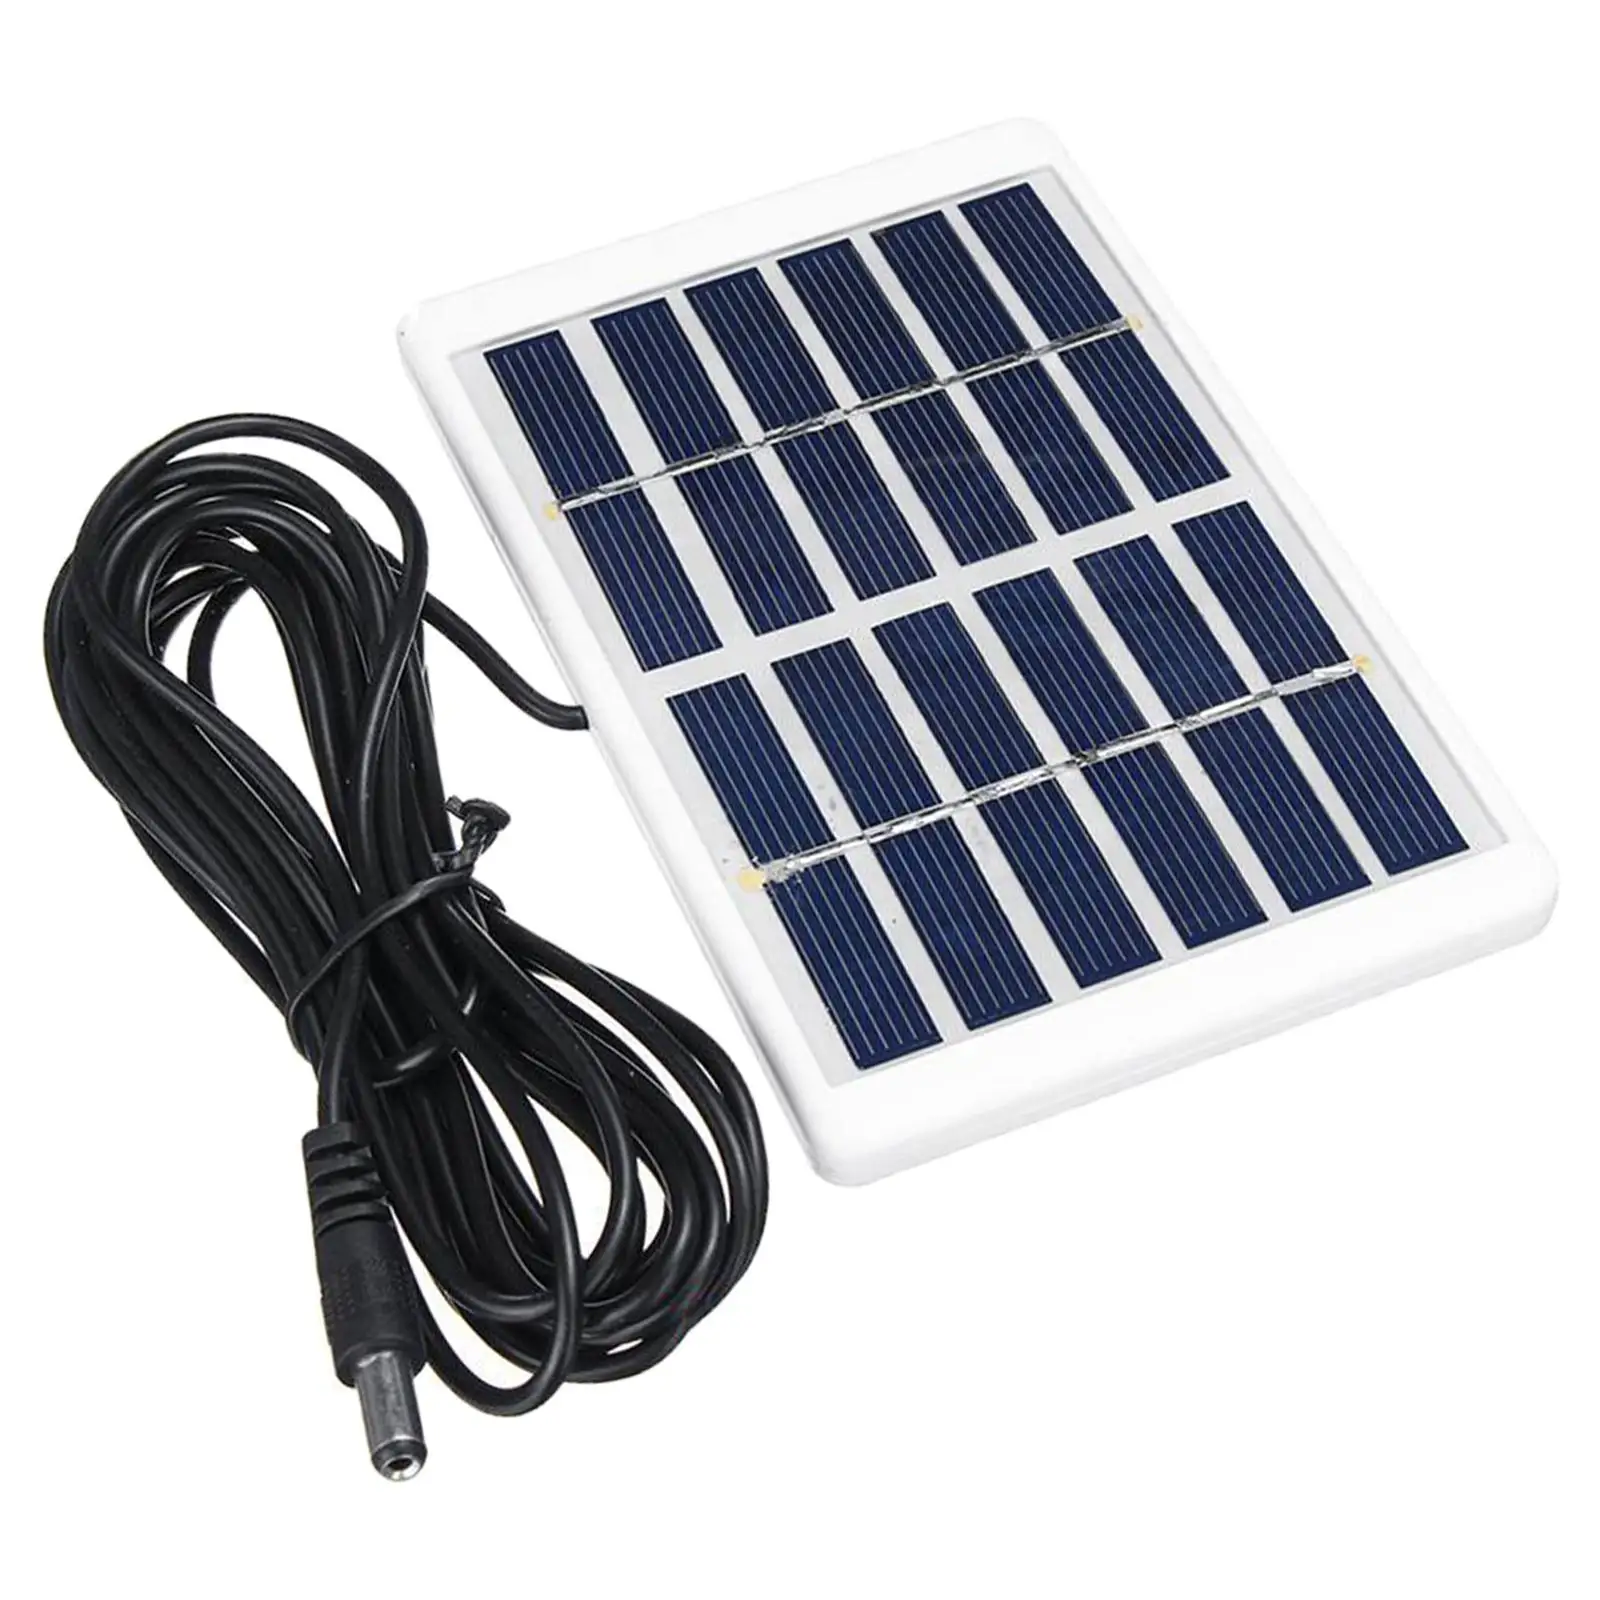 Portable DIY Battery Power Charge Module Solar Lights Polycrystalline 3 Meters DC Cable Mini